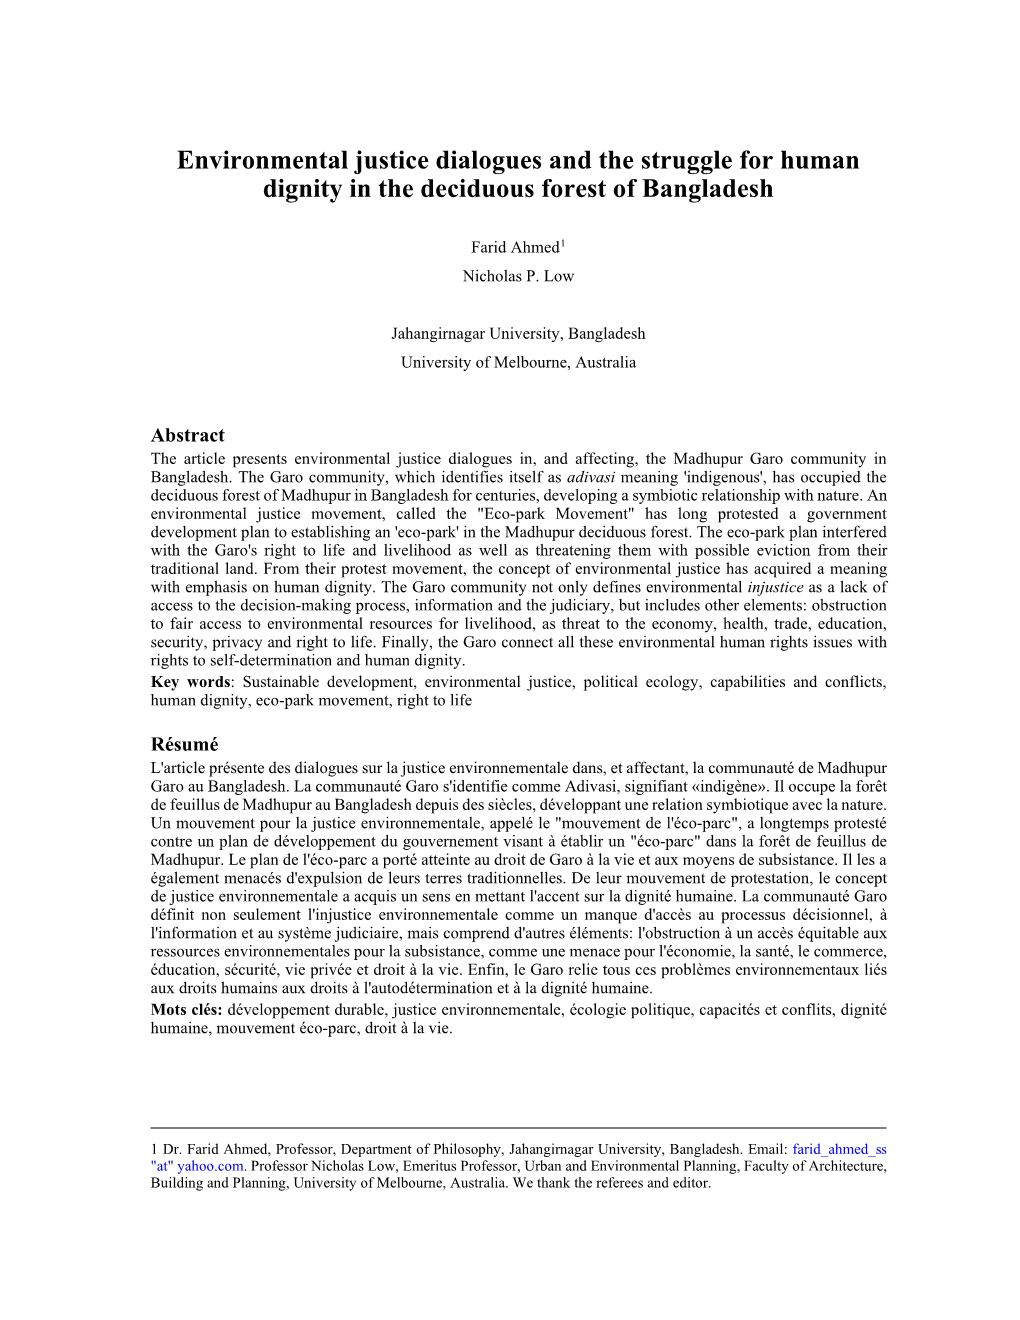 Environmental Justice Dialogues and the Struggle for Human Dignity in the Deciduous Forest of Bangladesh